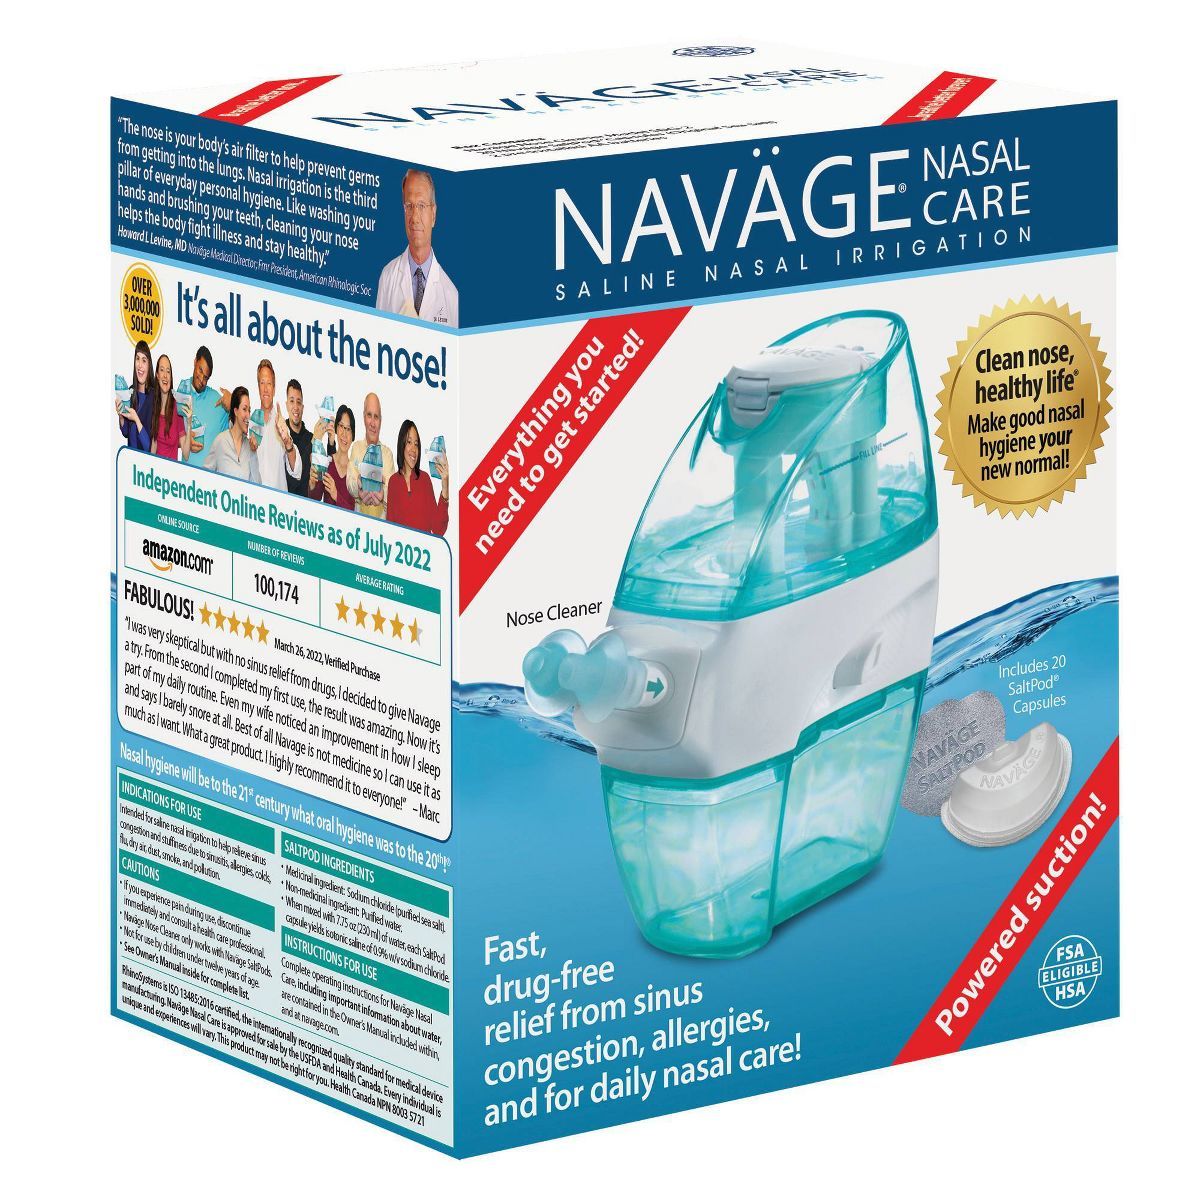 NAVAGE NASAL CARE Nose Cleanser and SaltPods | Target